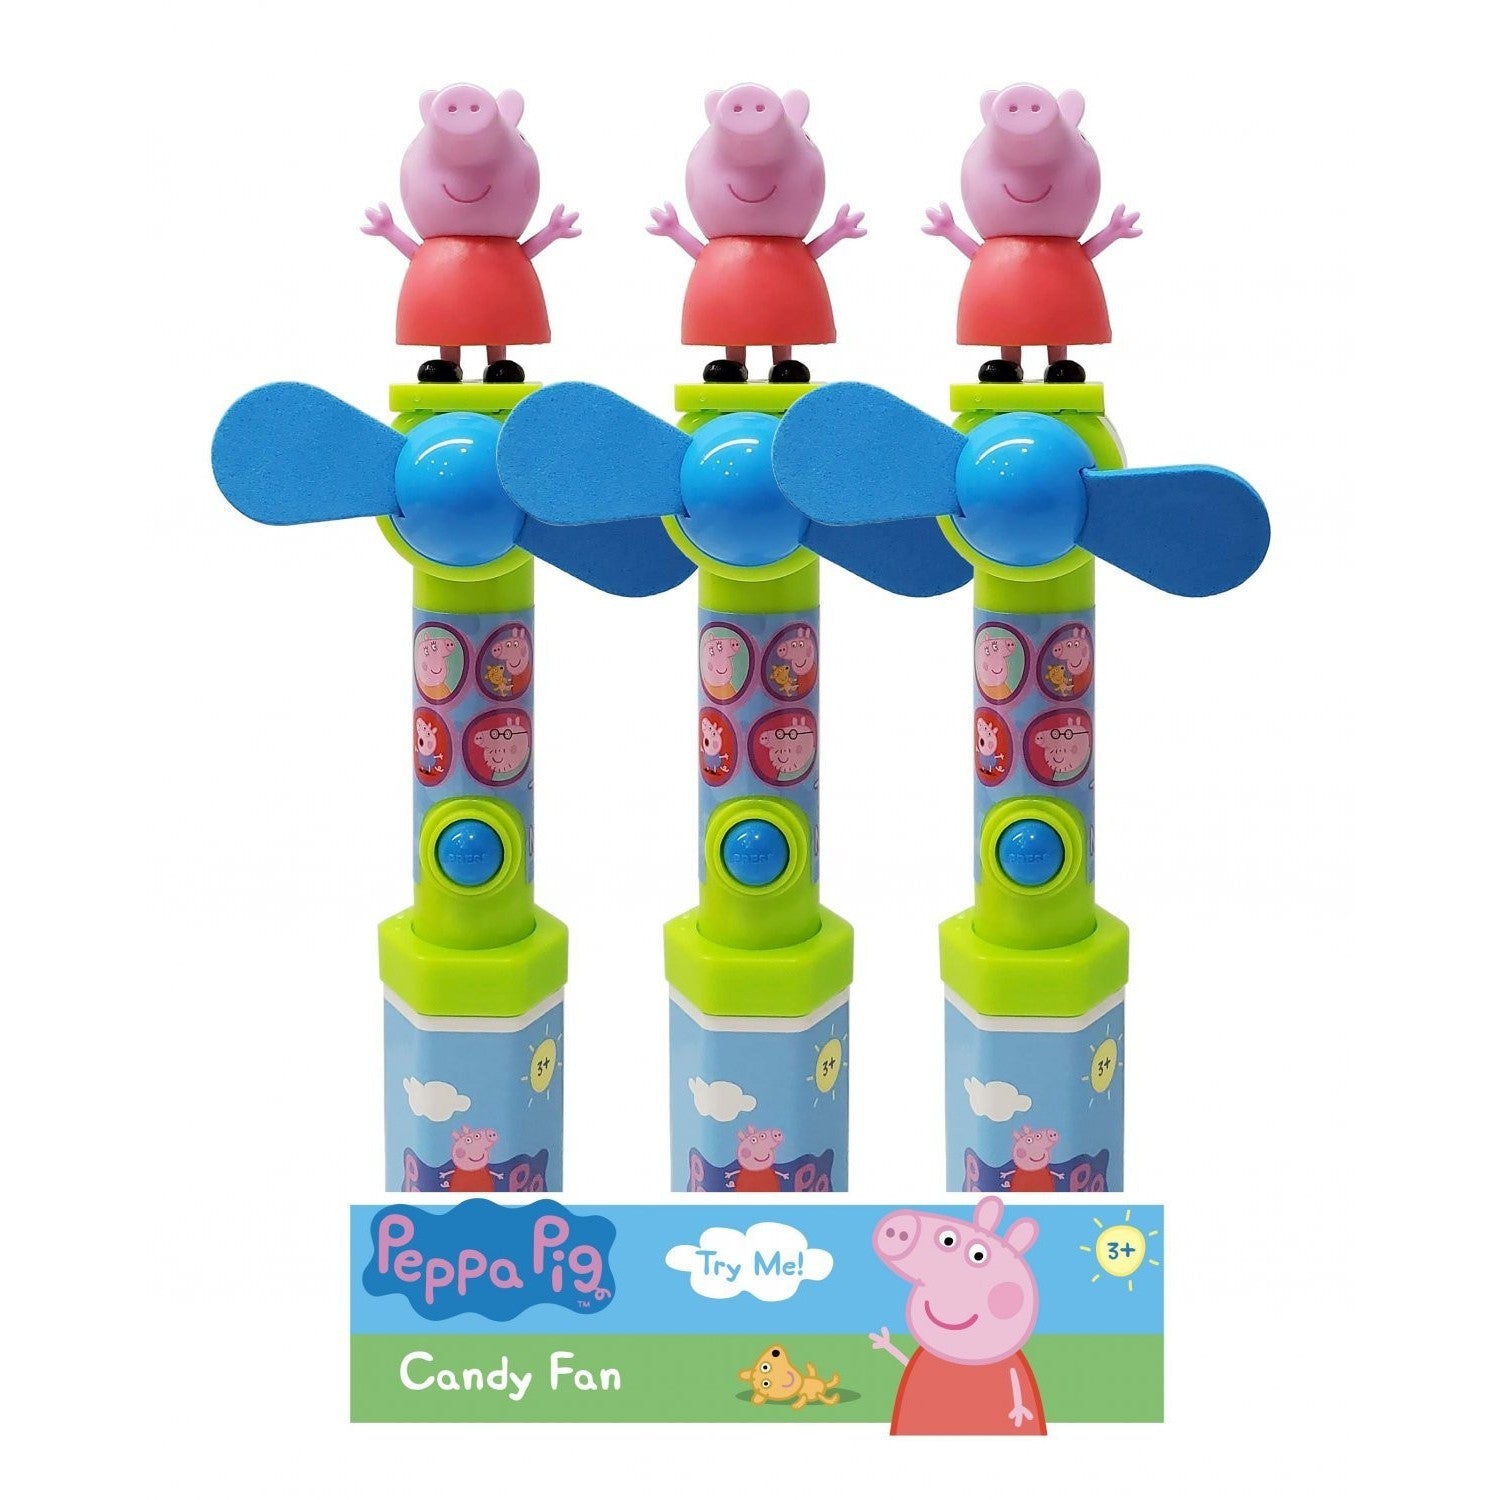 Peppa Pig Character Fan Candy Toy - All City Candy